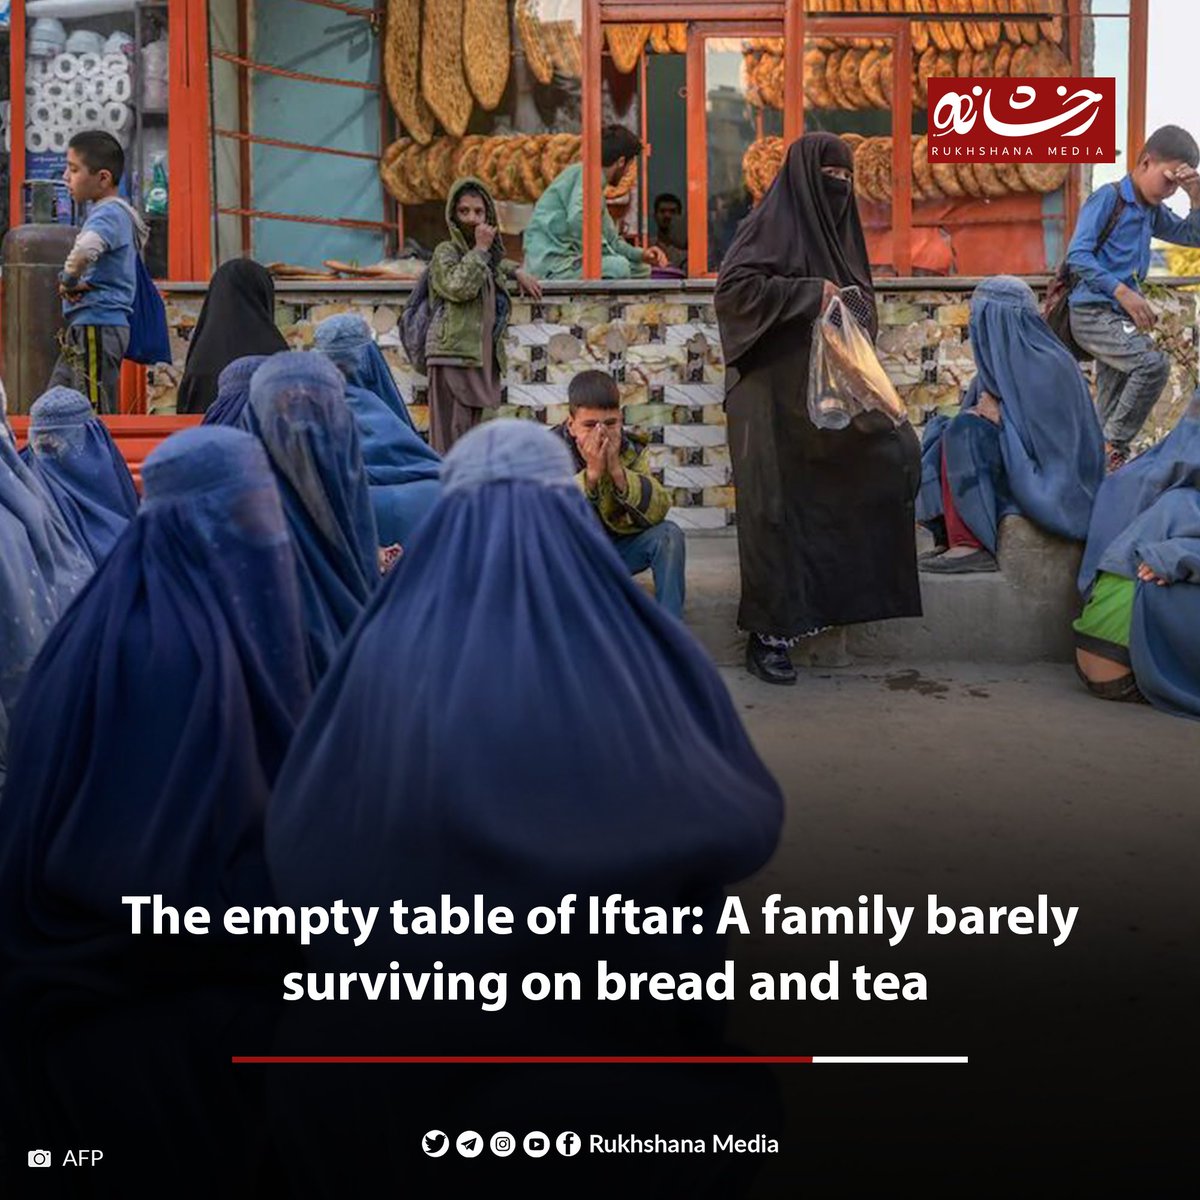 #ICYMI The UN’s World Food Programme (WFP) estimates that one in three Afghans don’t know where their next meal will come from. It’s a statistic that isn’t just about hunger. The consequences ripple out across their lives. Read more here: rukhshana.com/en/the-empty-t…